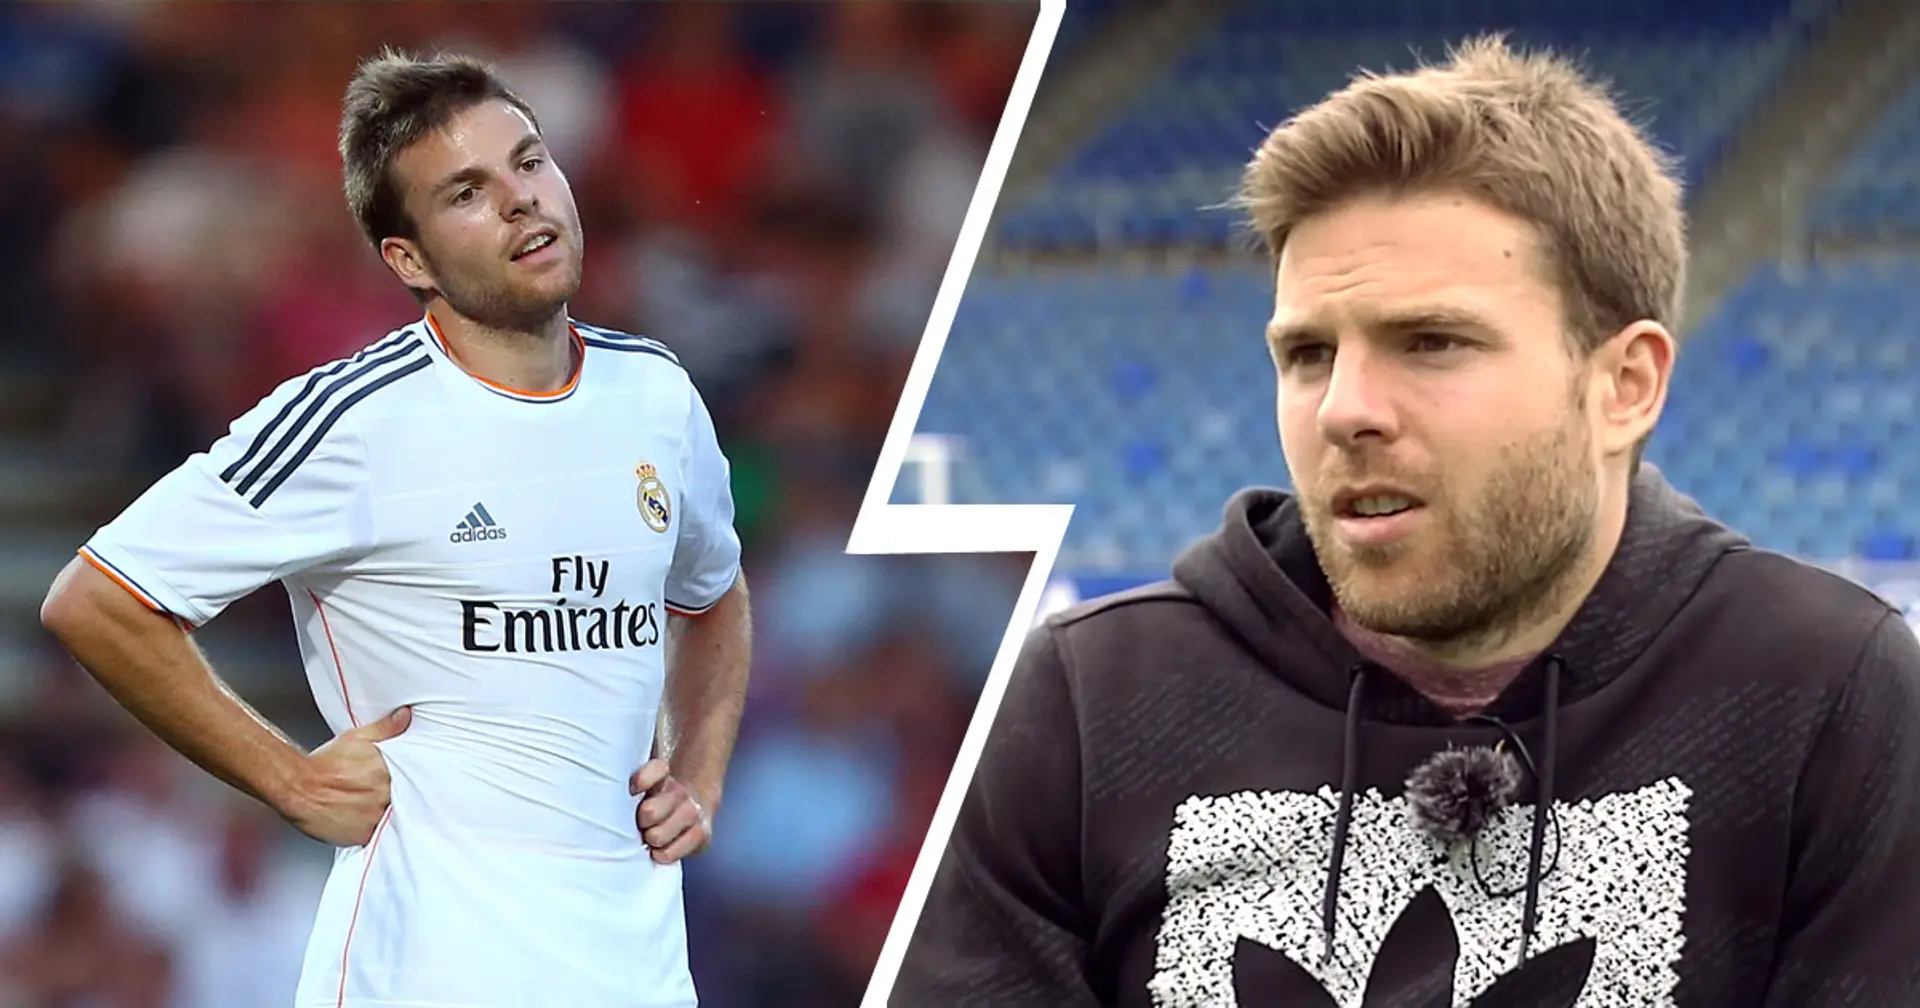 'It’s a whole different world': Asier Illarramendi opens up on why he flopped at Real Madrid